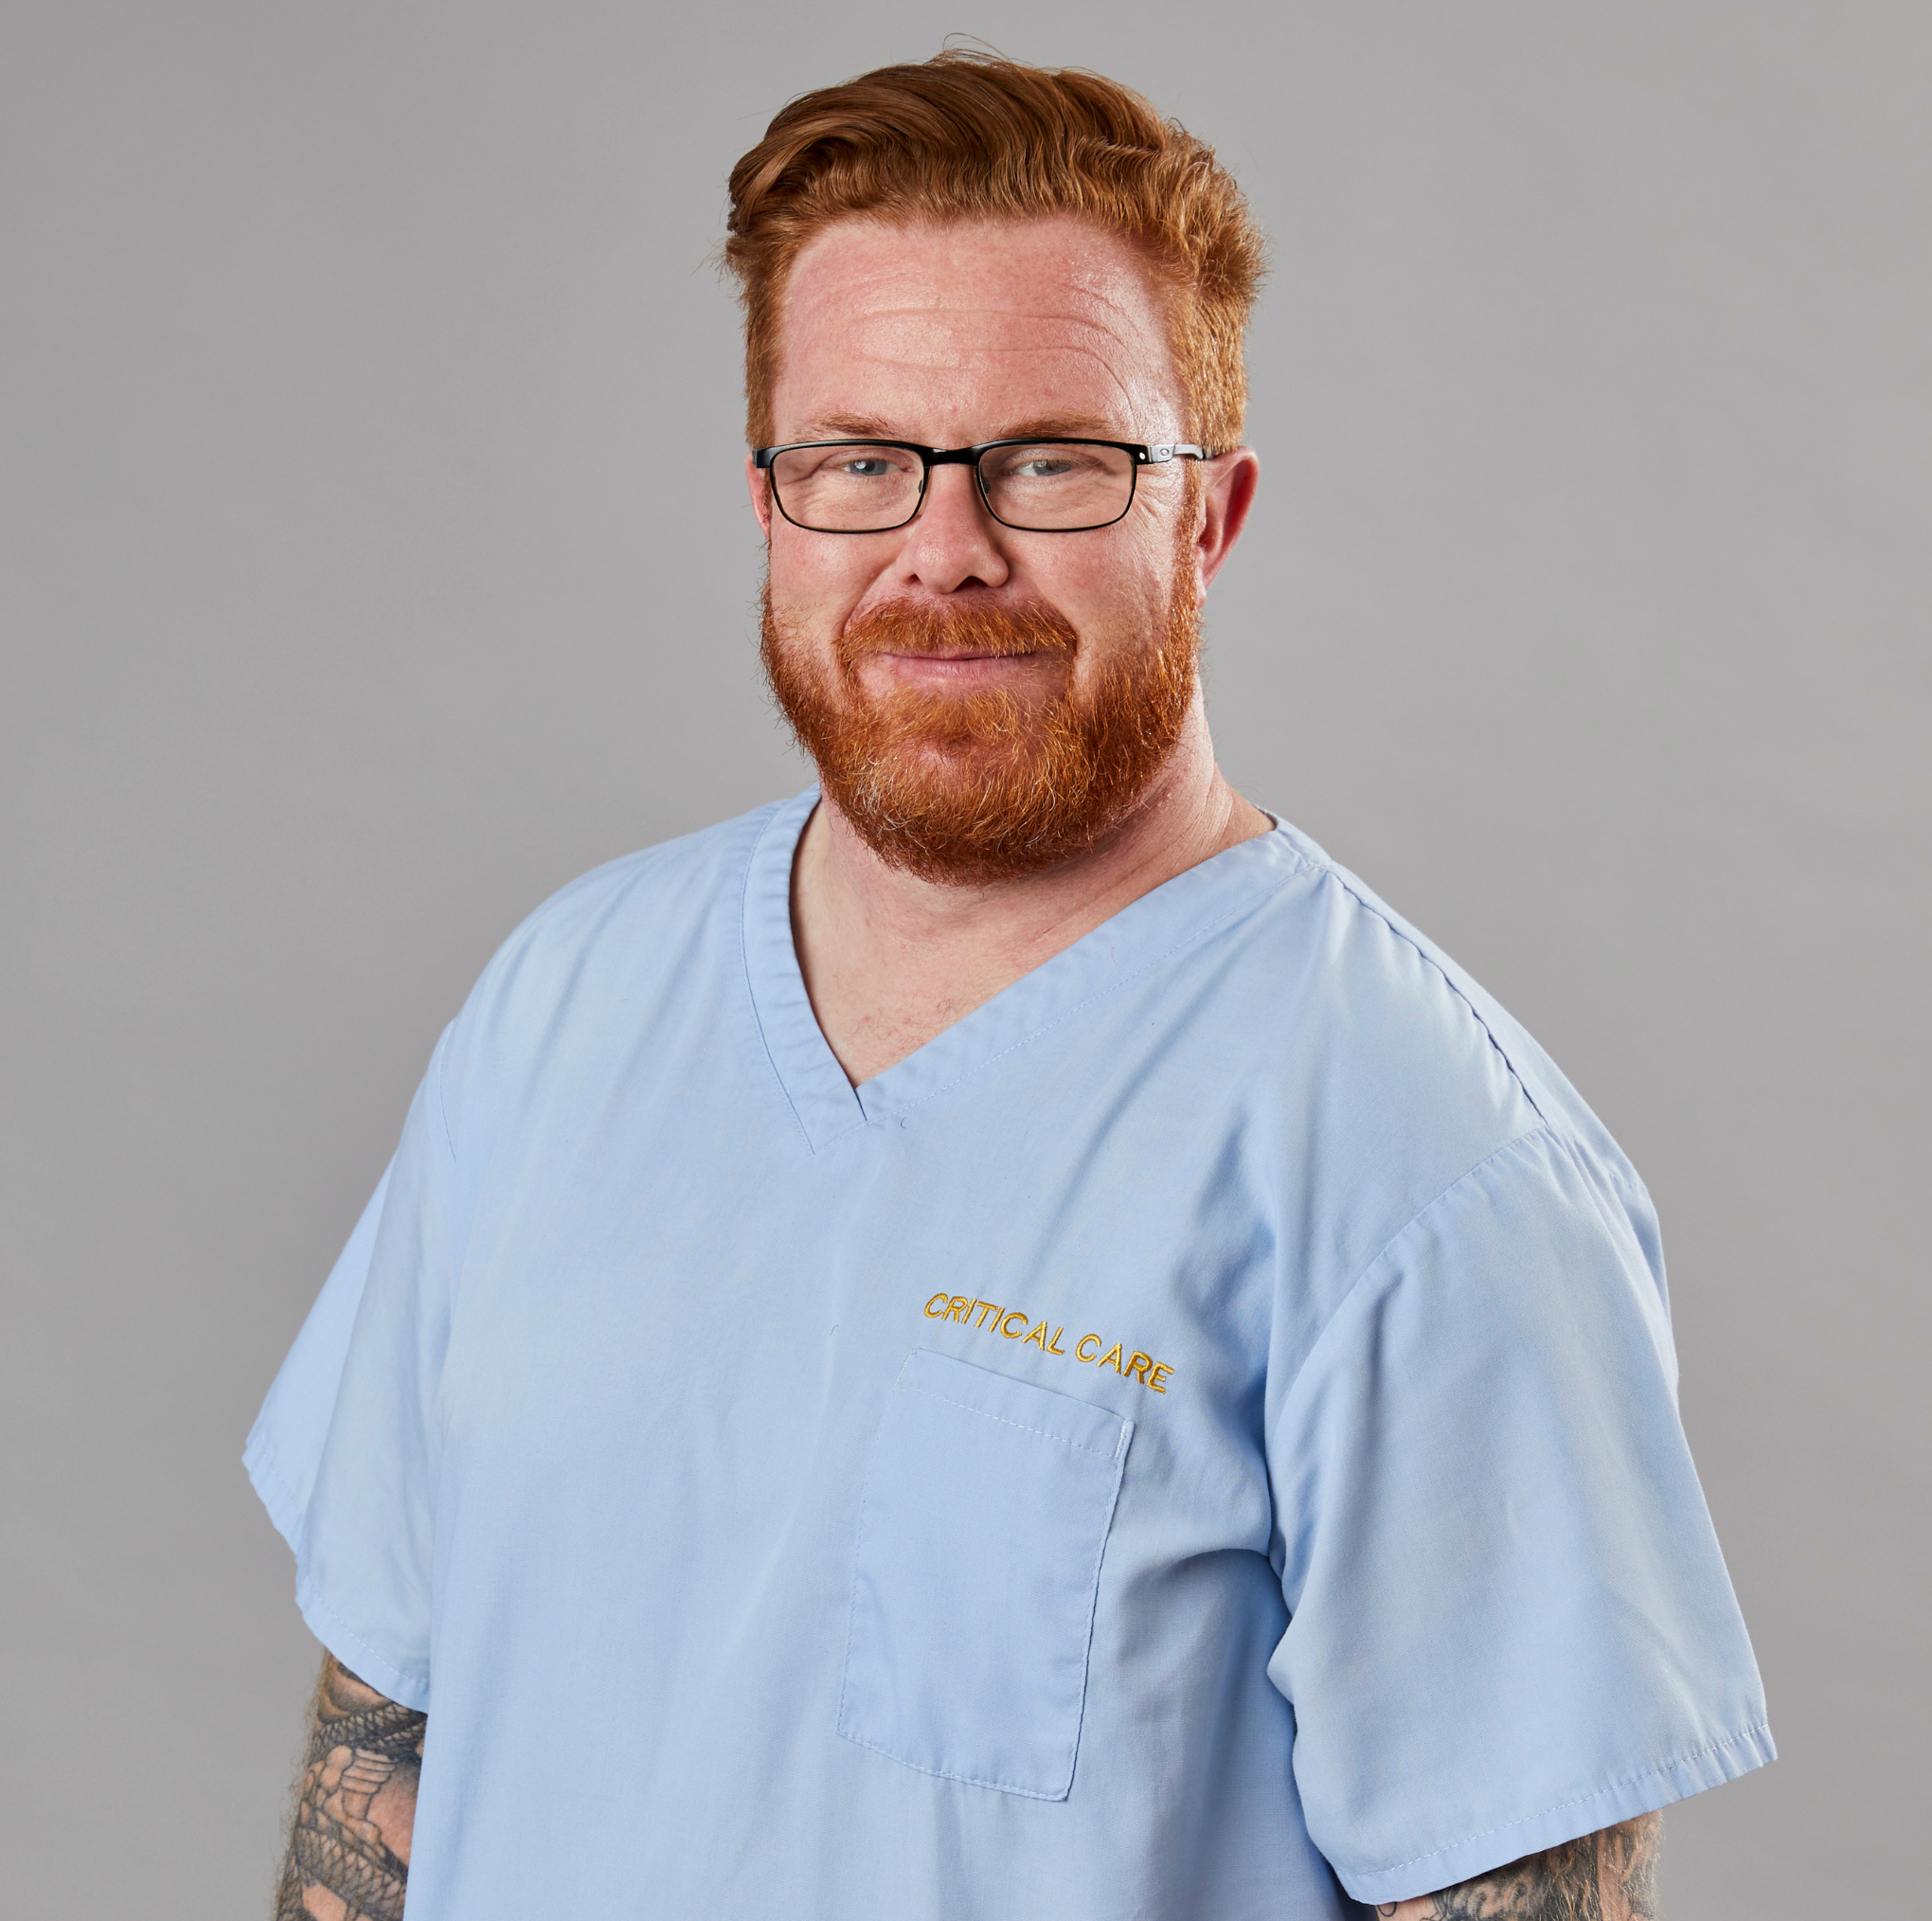 A man with a beard wearing glasses and a light blue scrubs labeled "critical care," smiling gently, with visible tattoo sleeves, standing against a grey background.